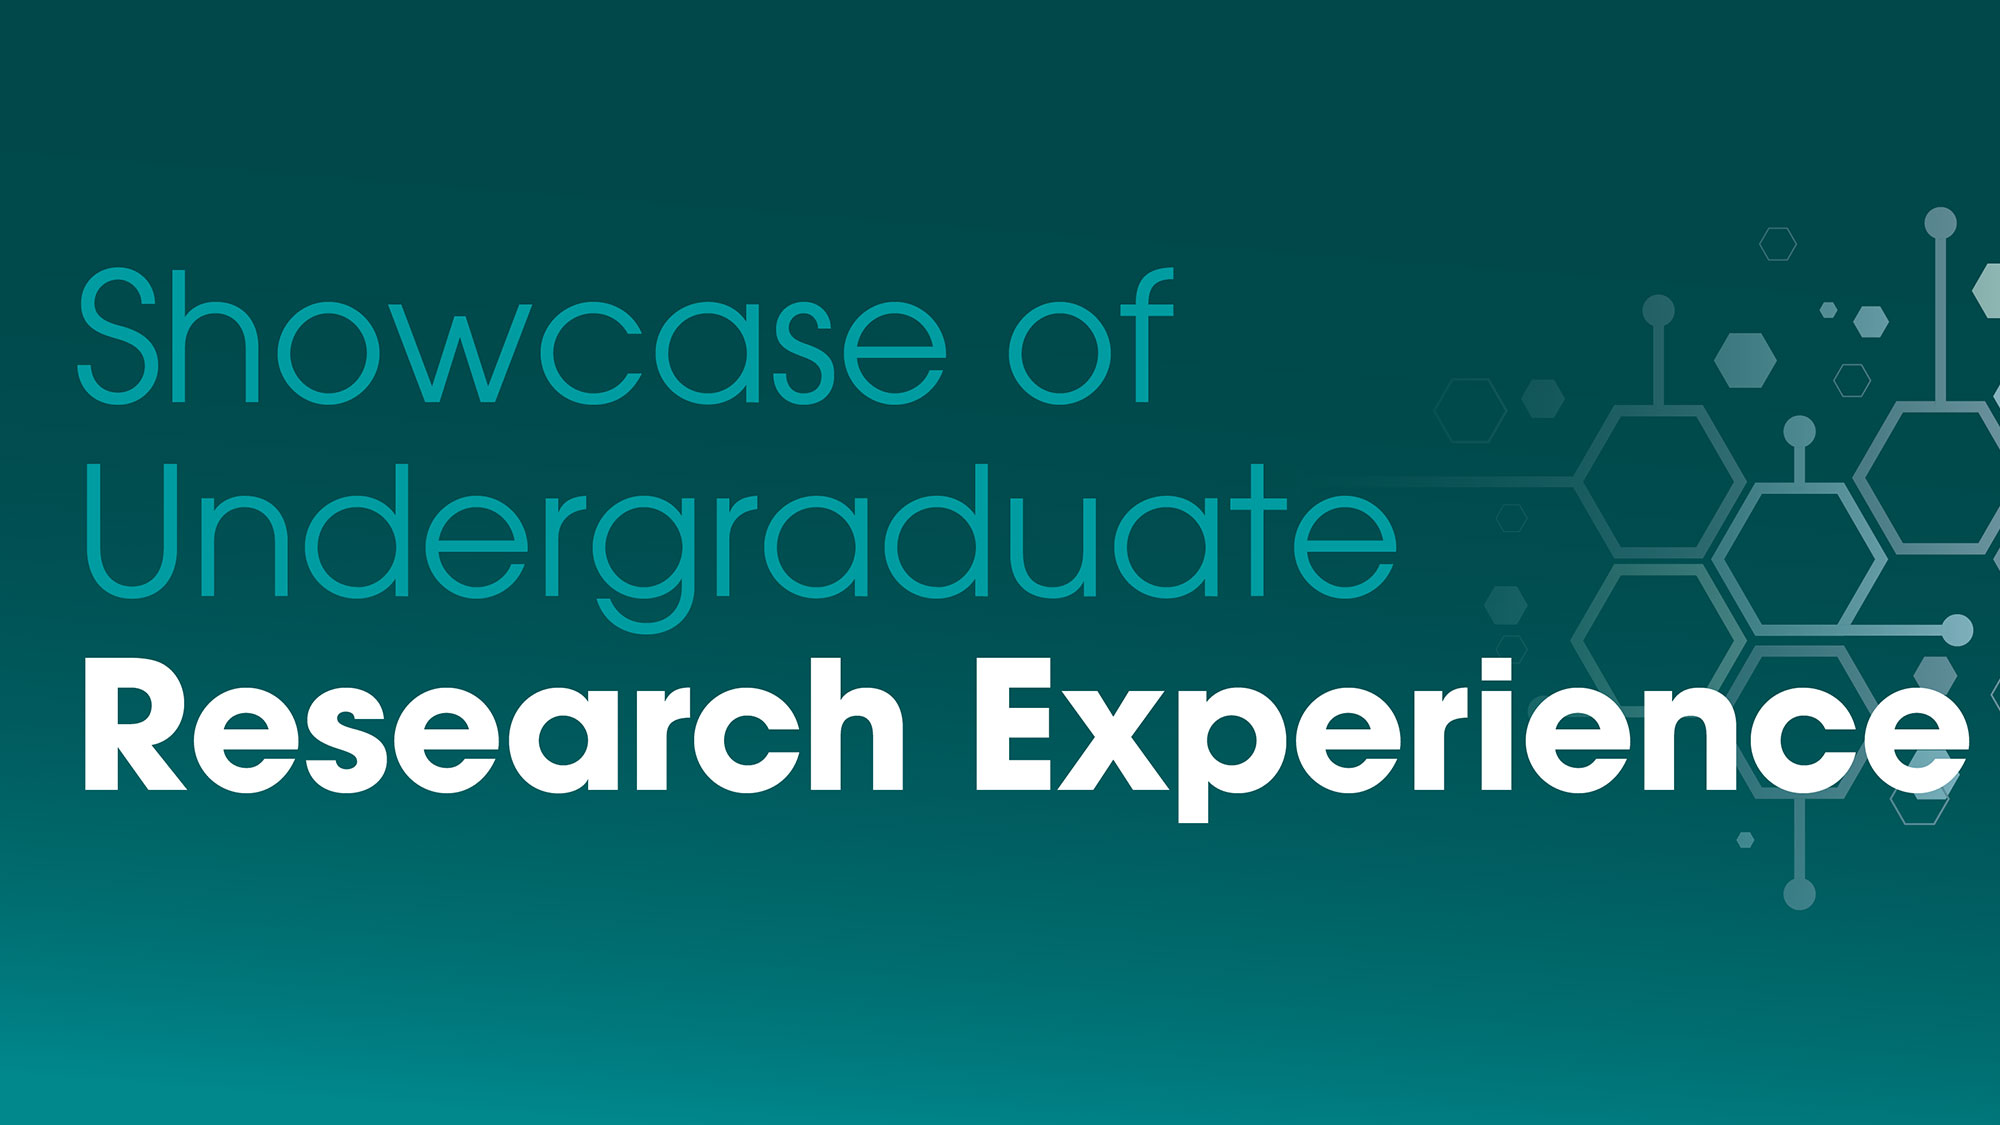 The Showcase of Undergraduate Research Experience (SURE) – applications now open